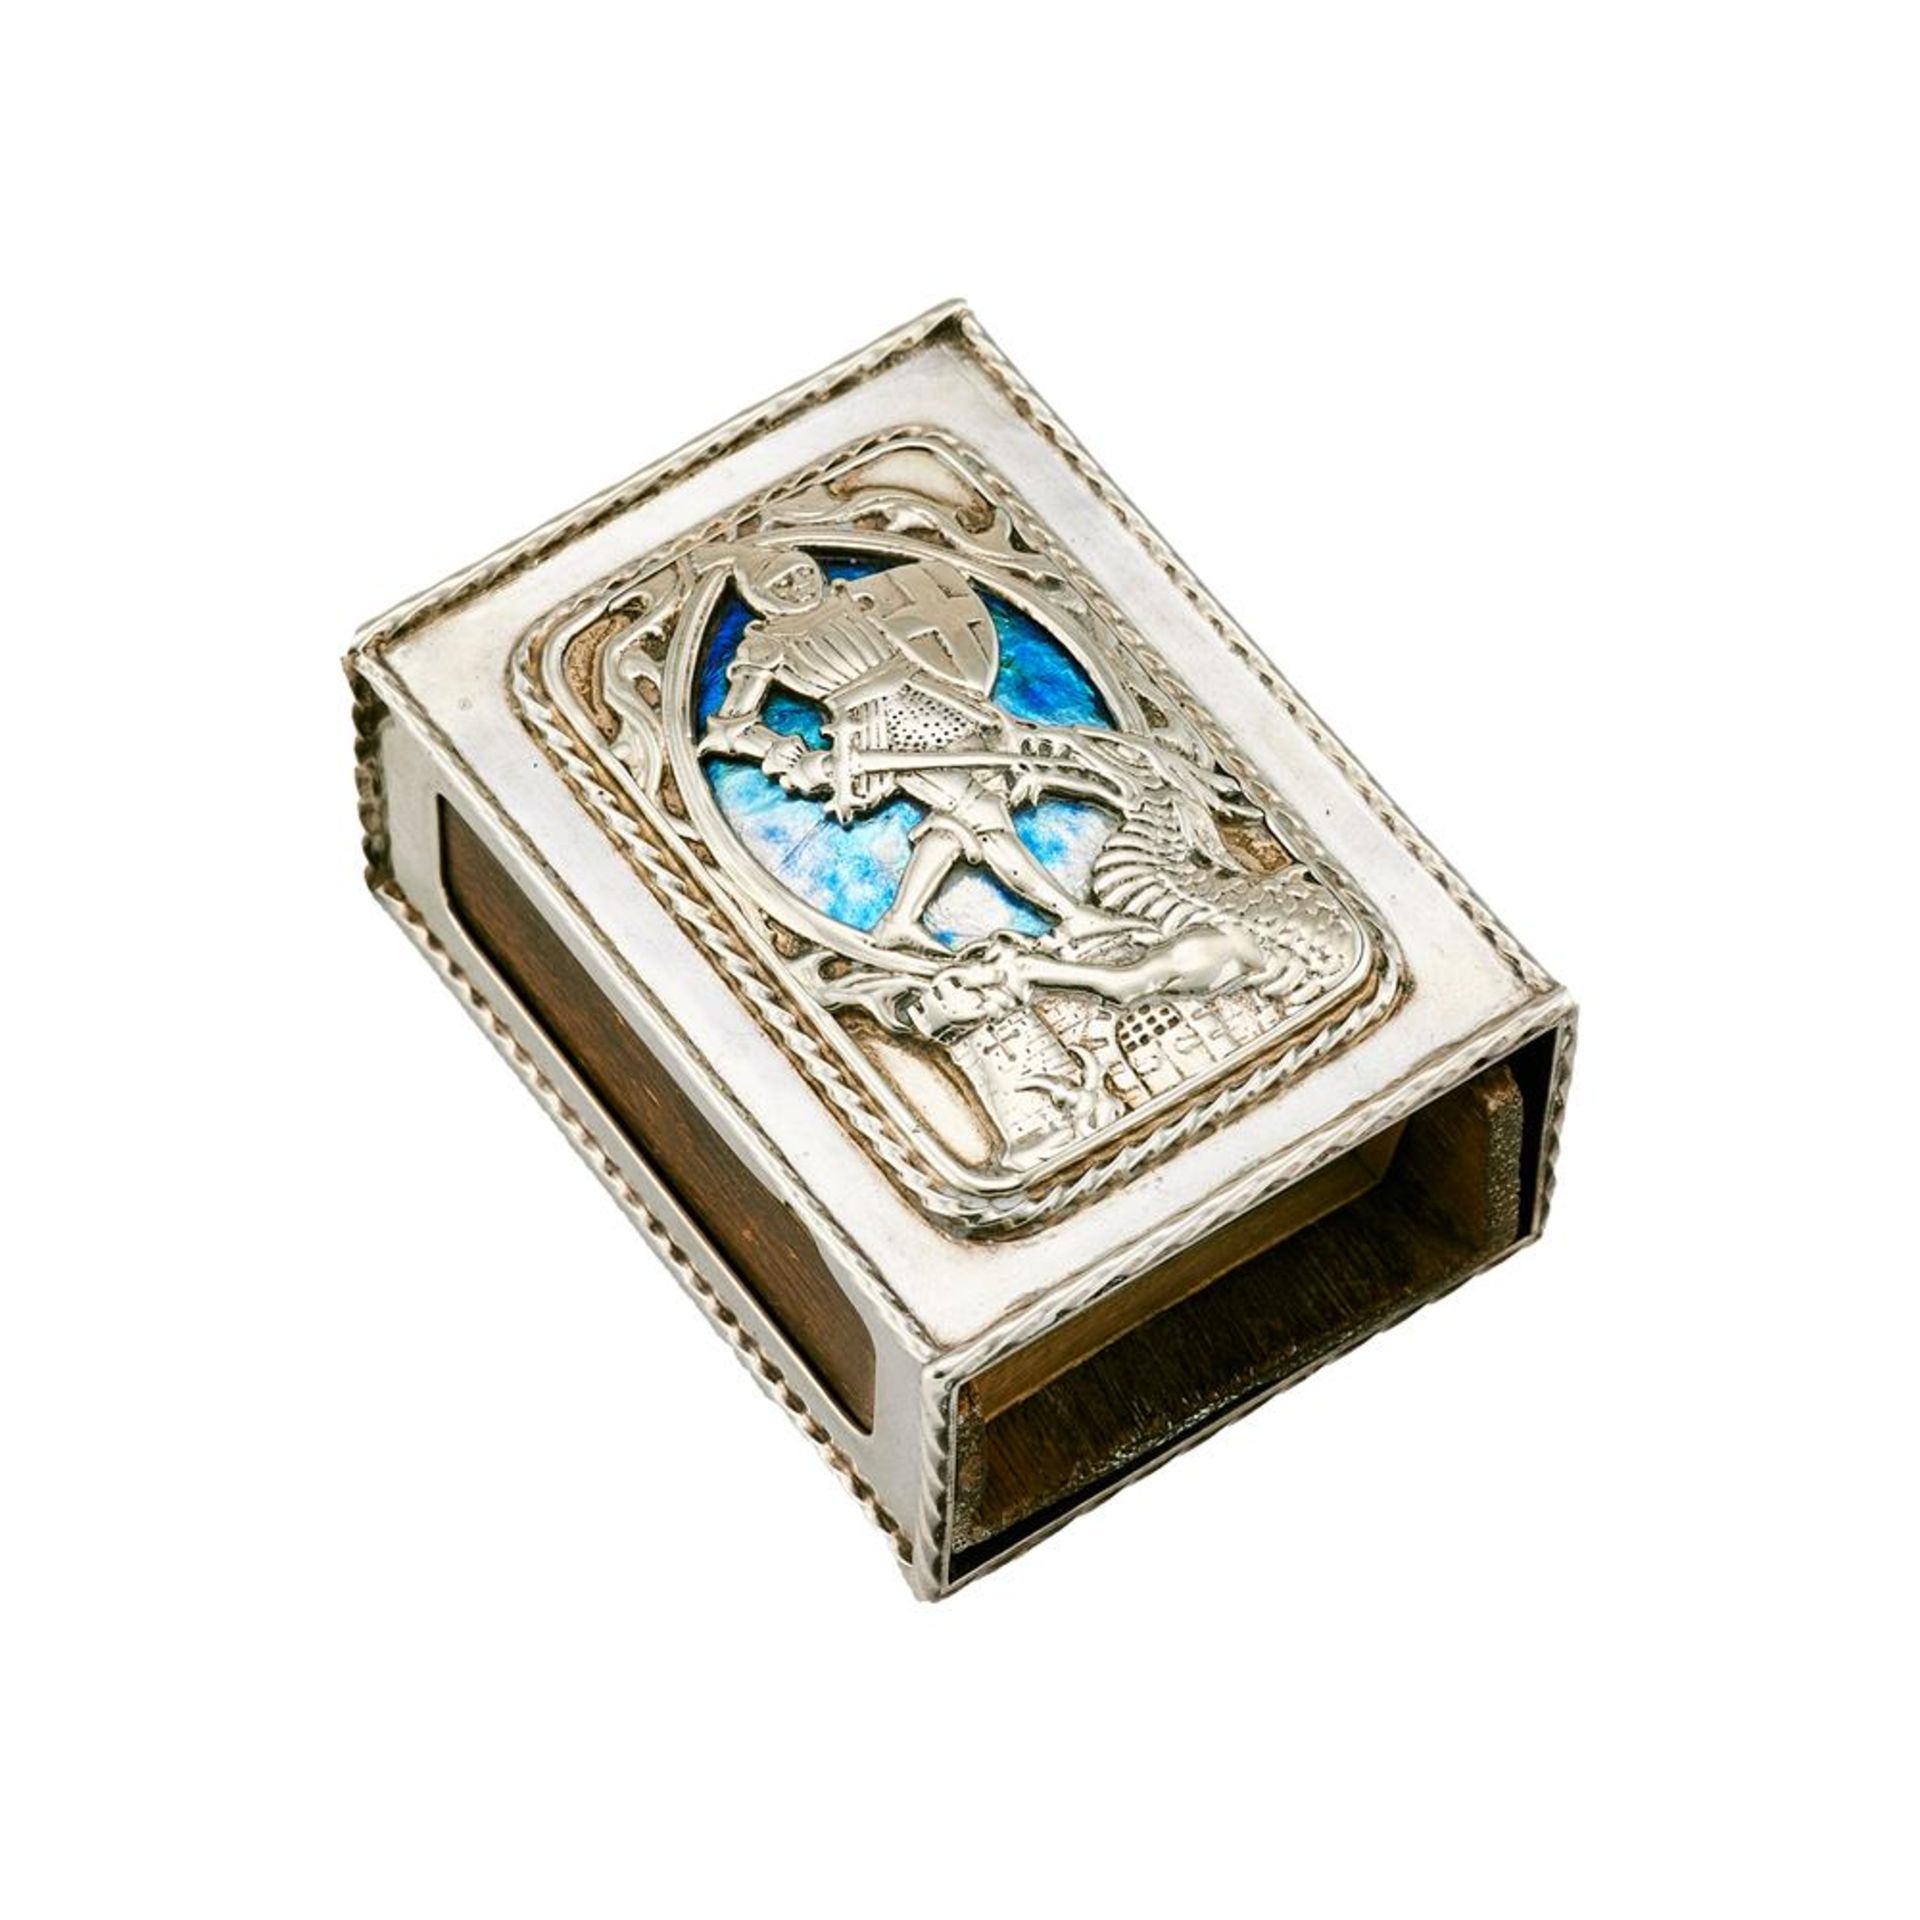 A SILVER AND ENAMEL MATCHBOX COVER